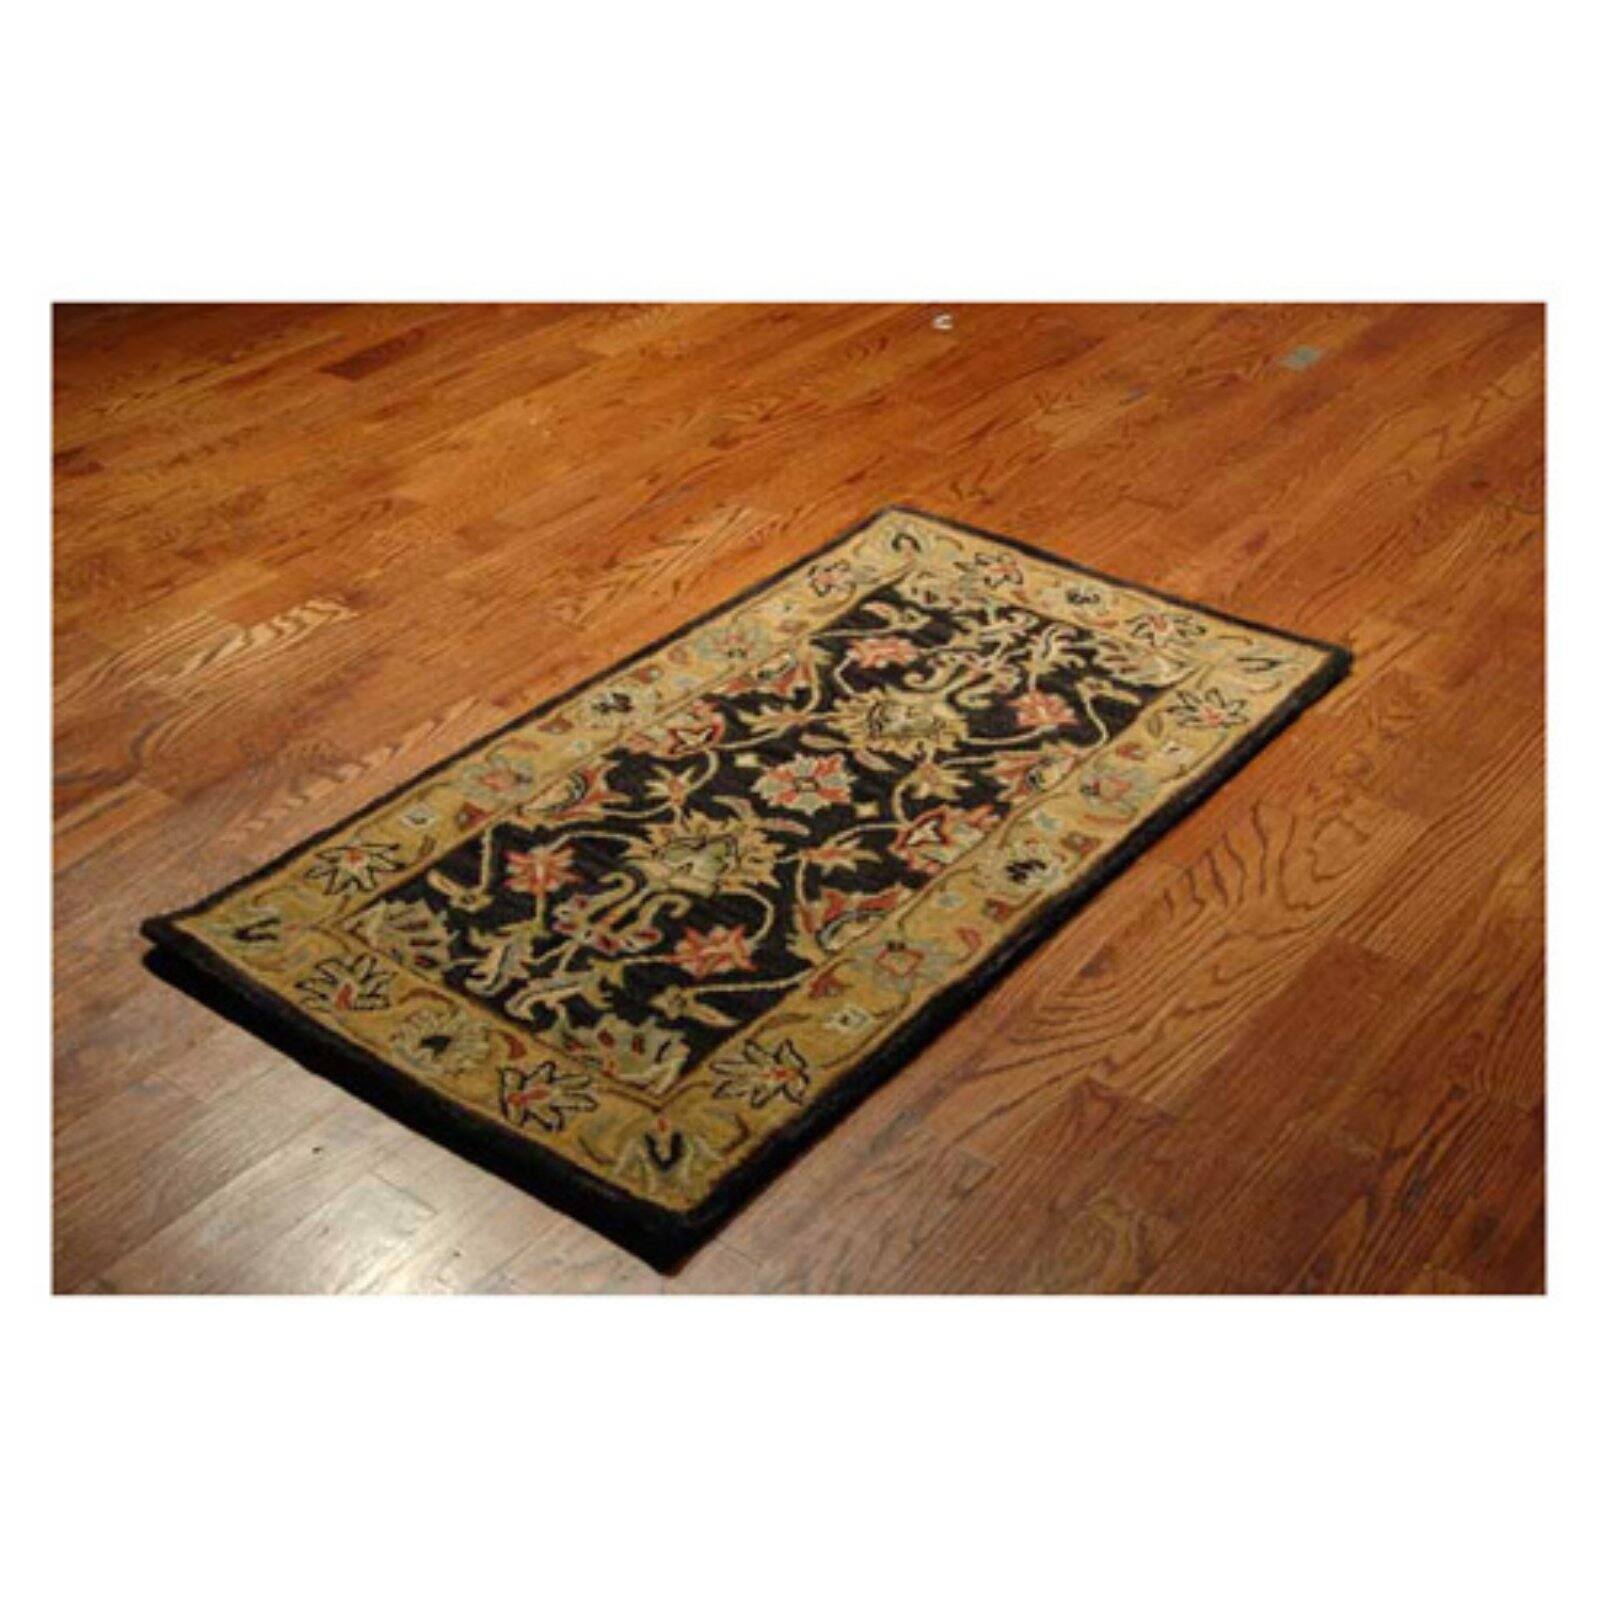 SAFAVIEH Heritage Regis Traditional Wool Area Rug, Charcoal/Gold, 5' x 8' - image 2 of 10